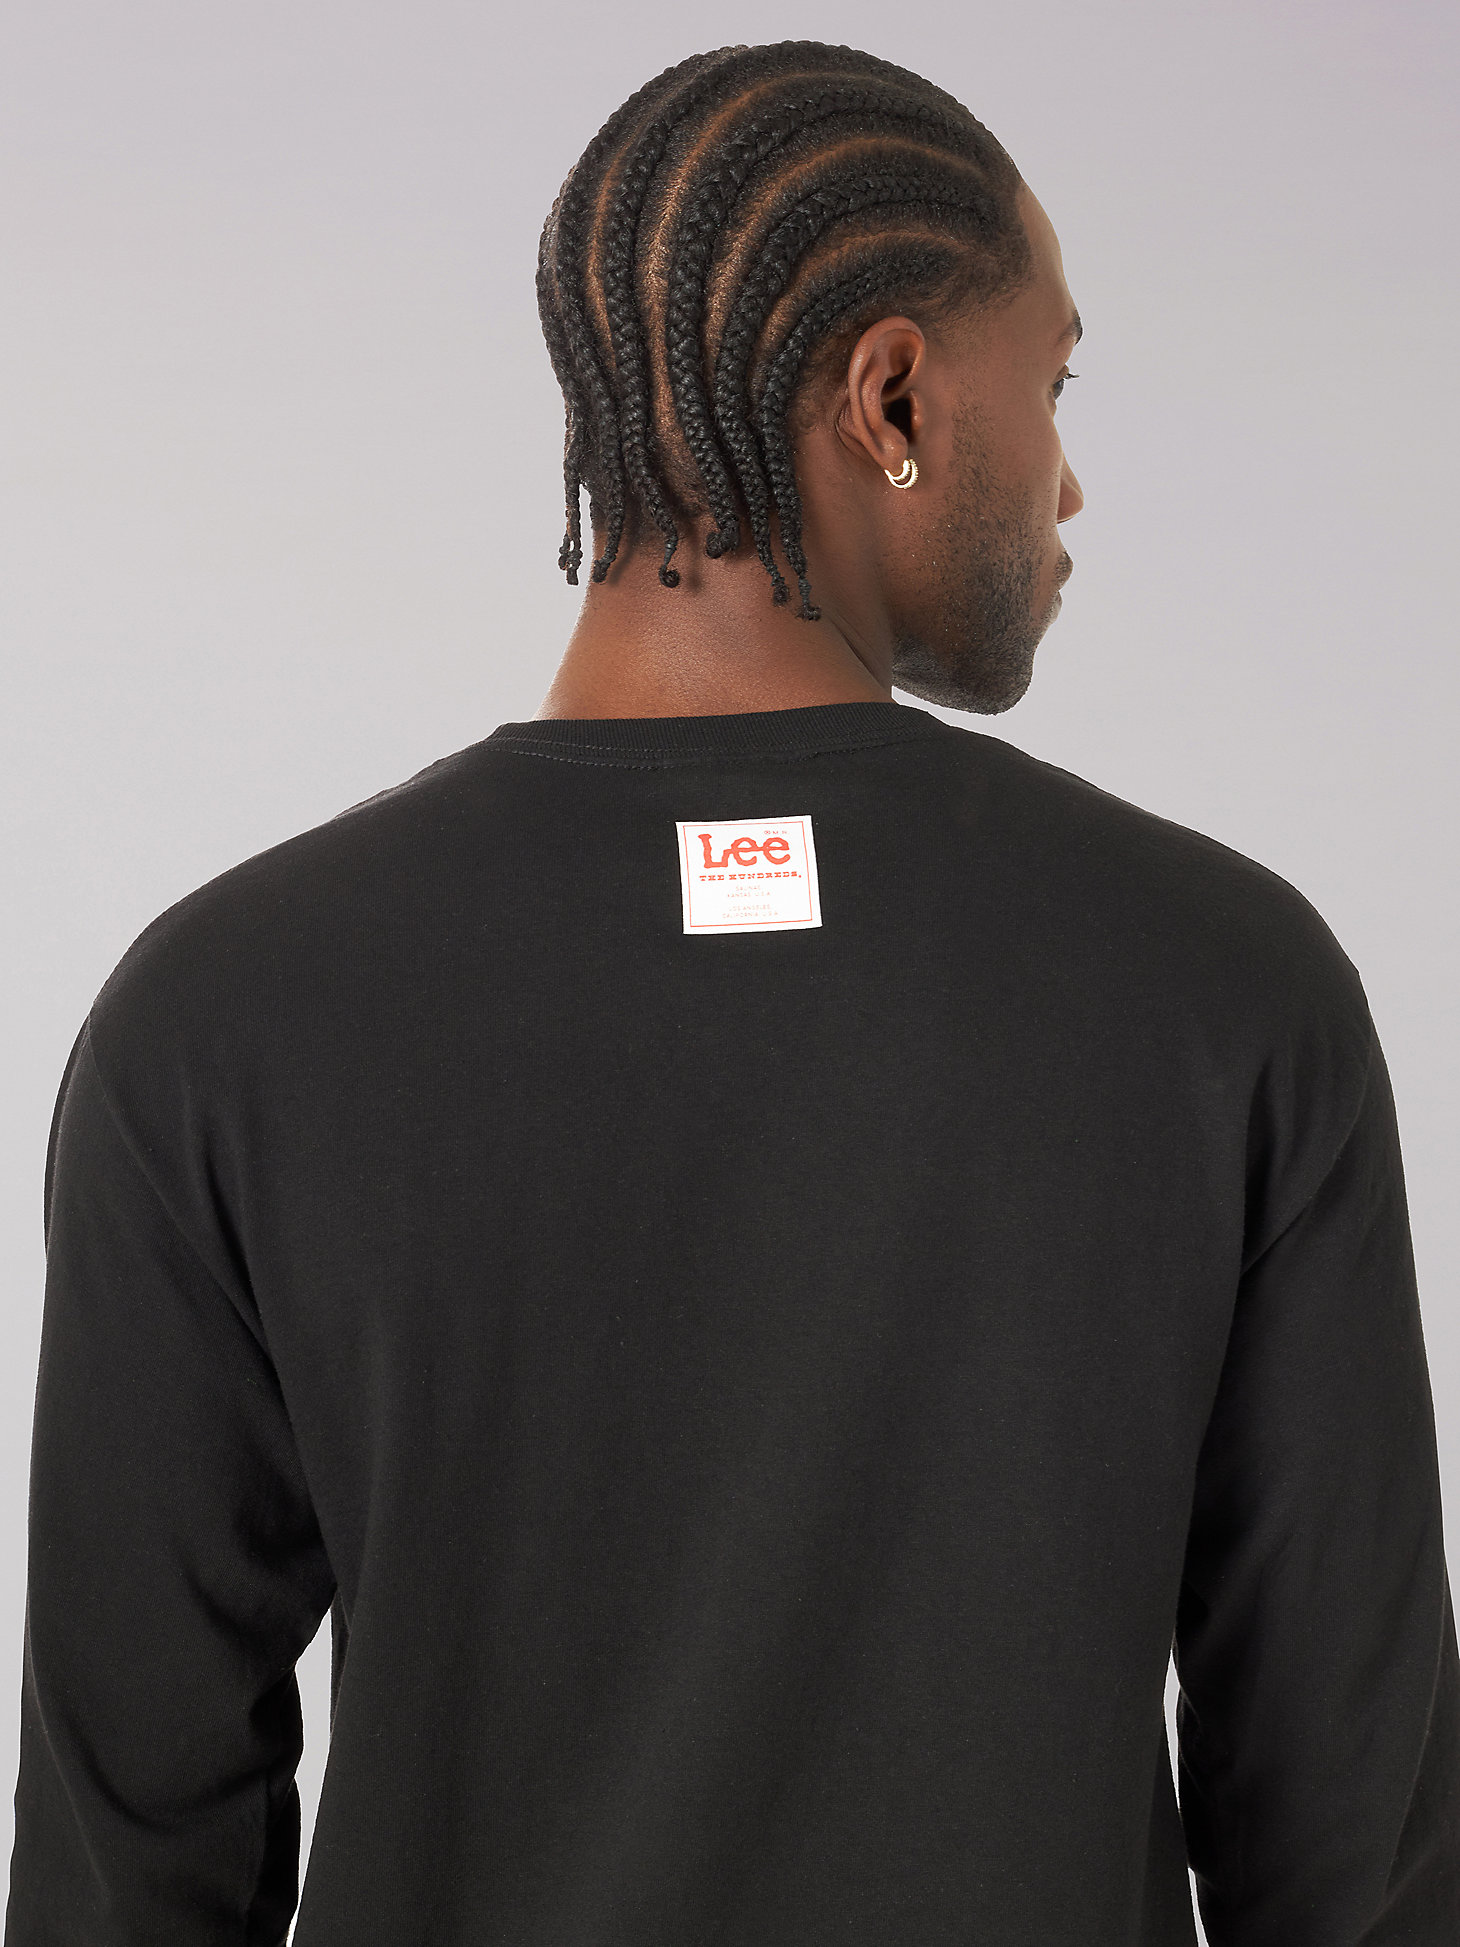 Men's Lee® x The Hundreds® Long Sleeve Storm Rider Graphic Tee in Black alternative view 3